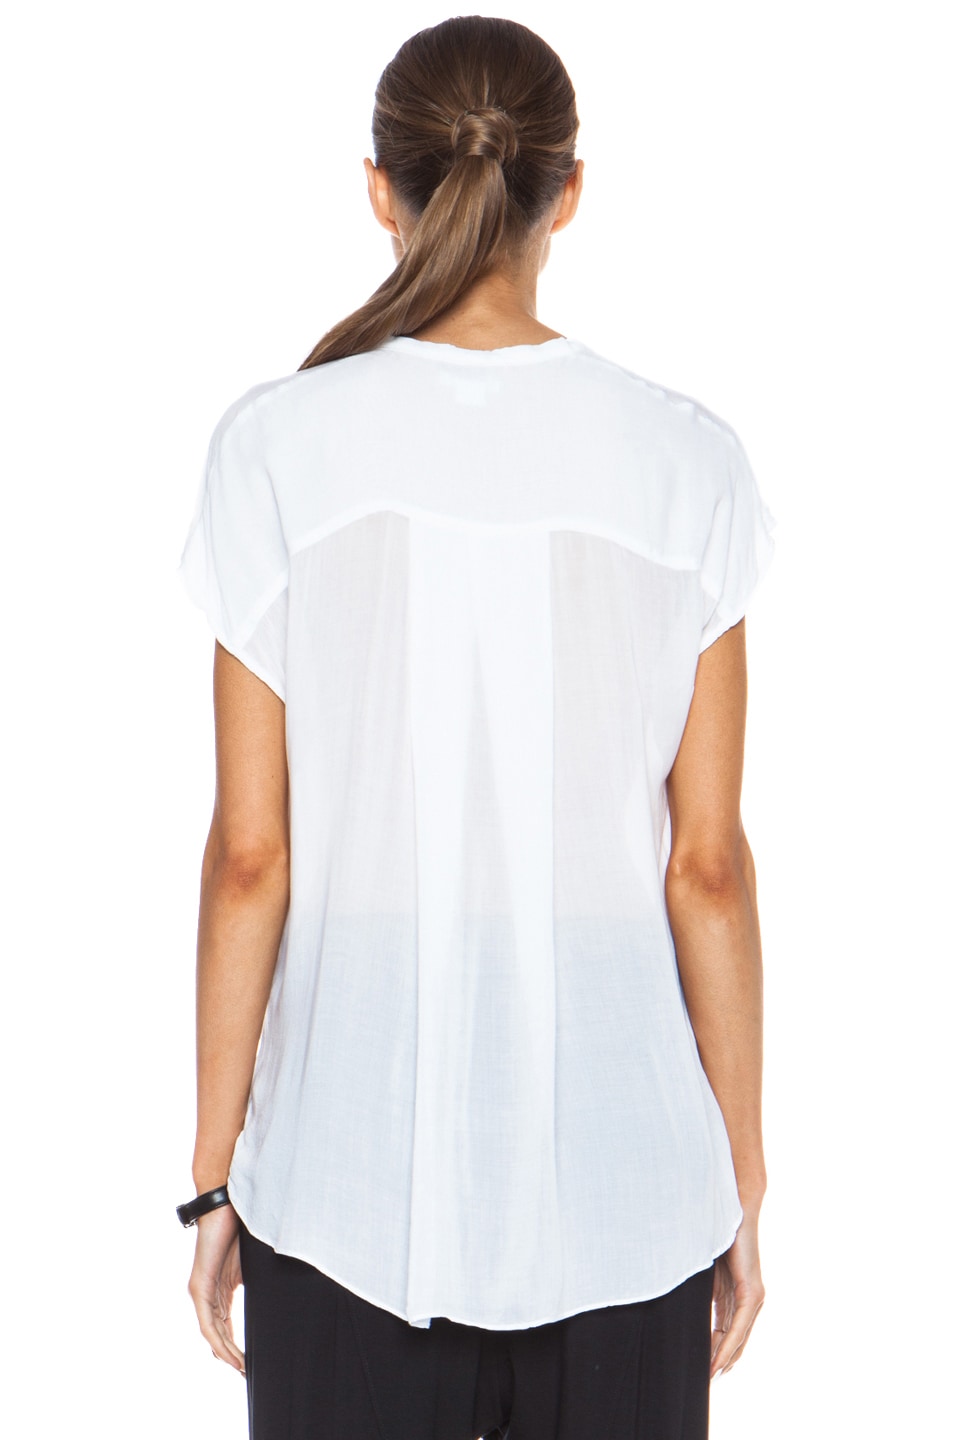 Helmut Lang Draped Angled Viscose Top in Optic White | FWRD